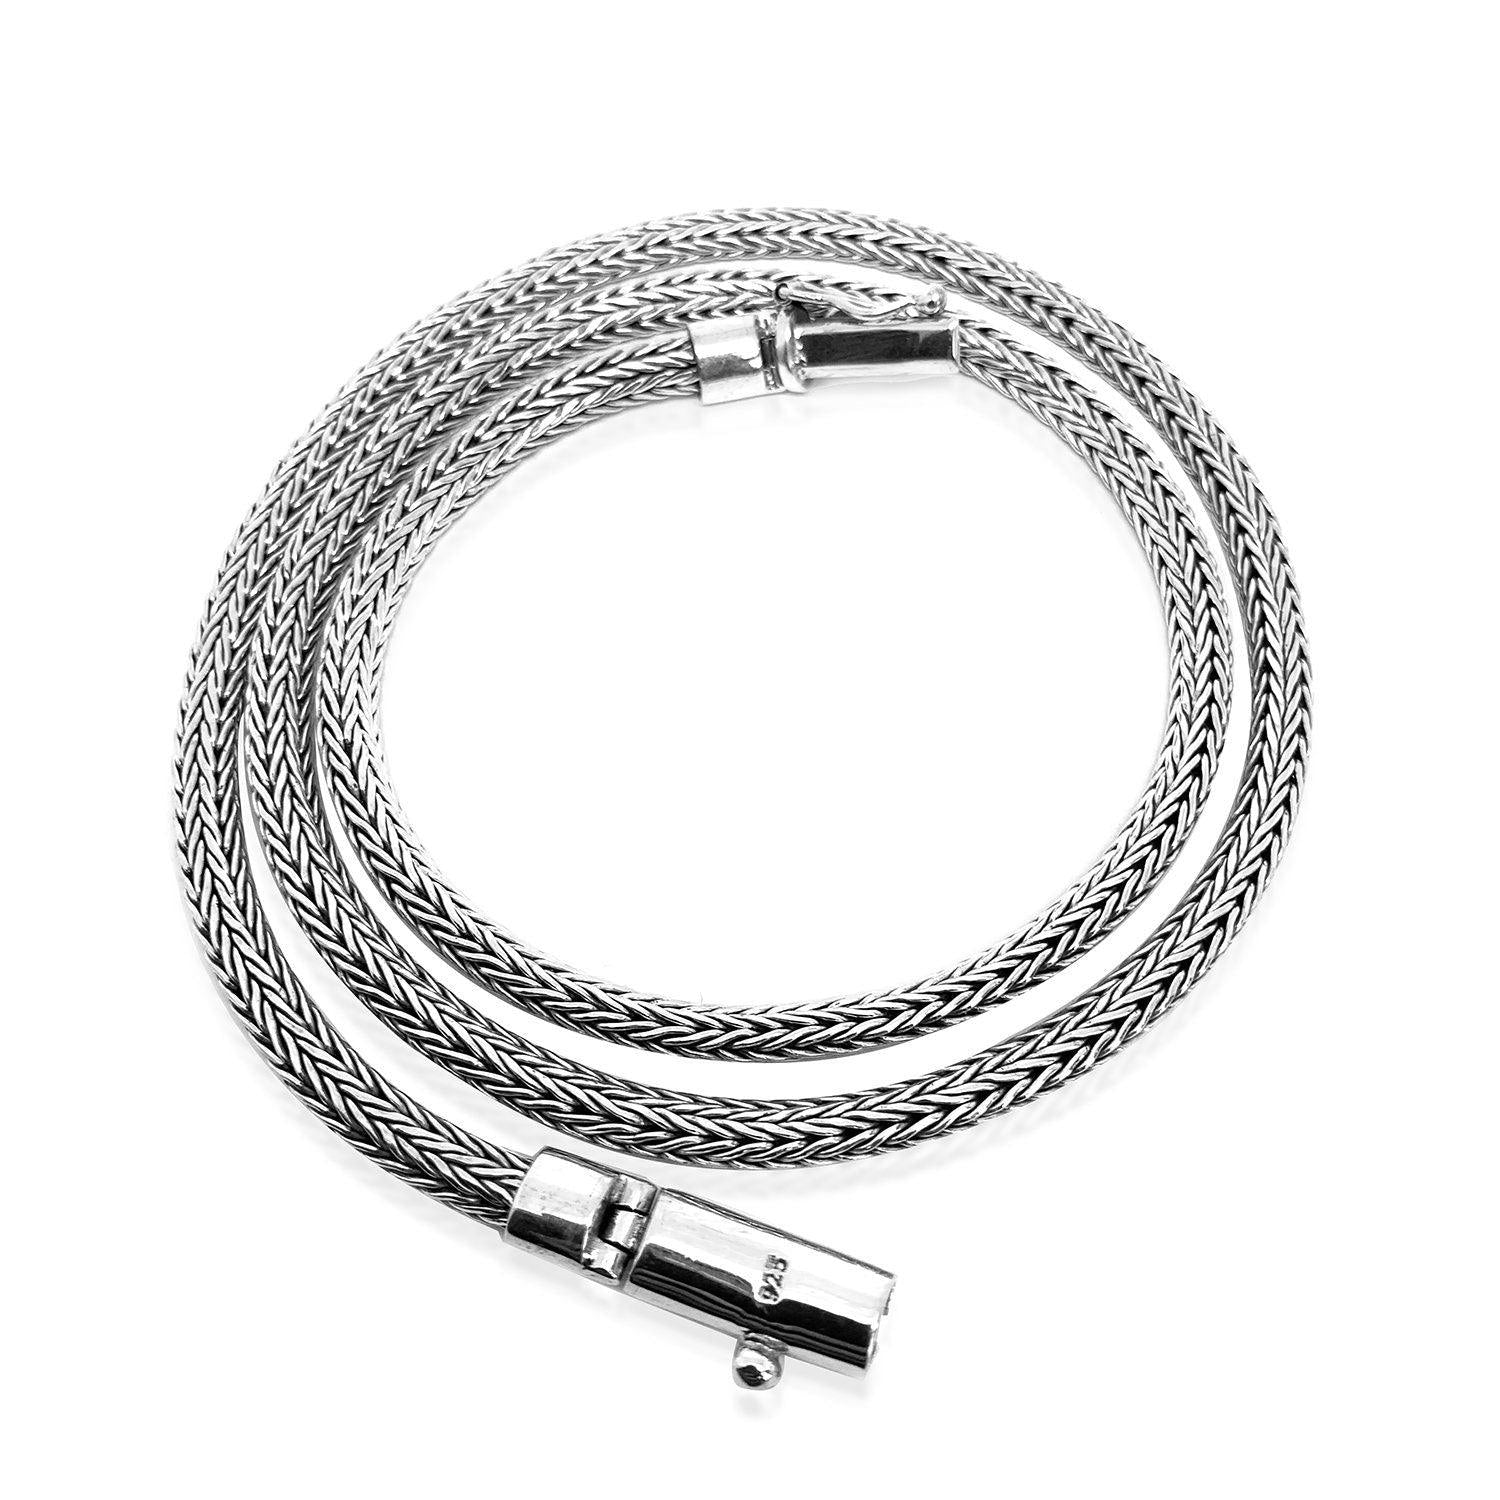 Balinese Handmade Solid Sterling Silver SNAKE Chain Necklace 4mm 18" 20" 24" - Inspiring Jewellery